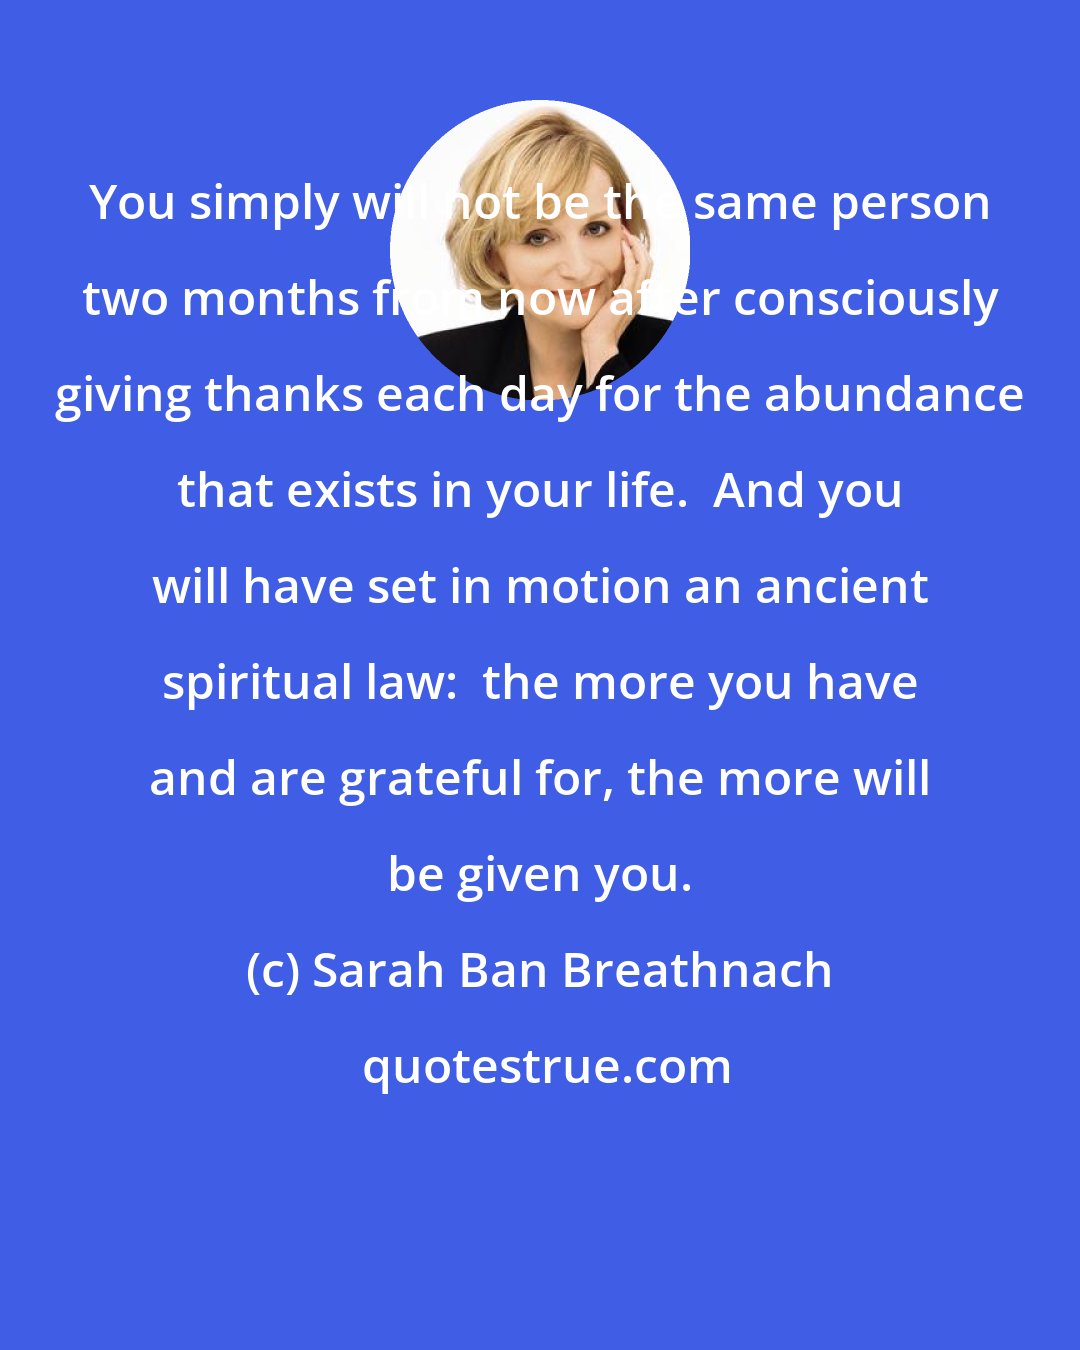 Sarah Ban Breathnach: You simply will not be the same person two months from now after consciously giving thanks each day for the abundance that exists in your life.  And you will have set in motion an ancient spiritual law:  the more you have and are grateful for, the more will be given you.